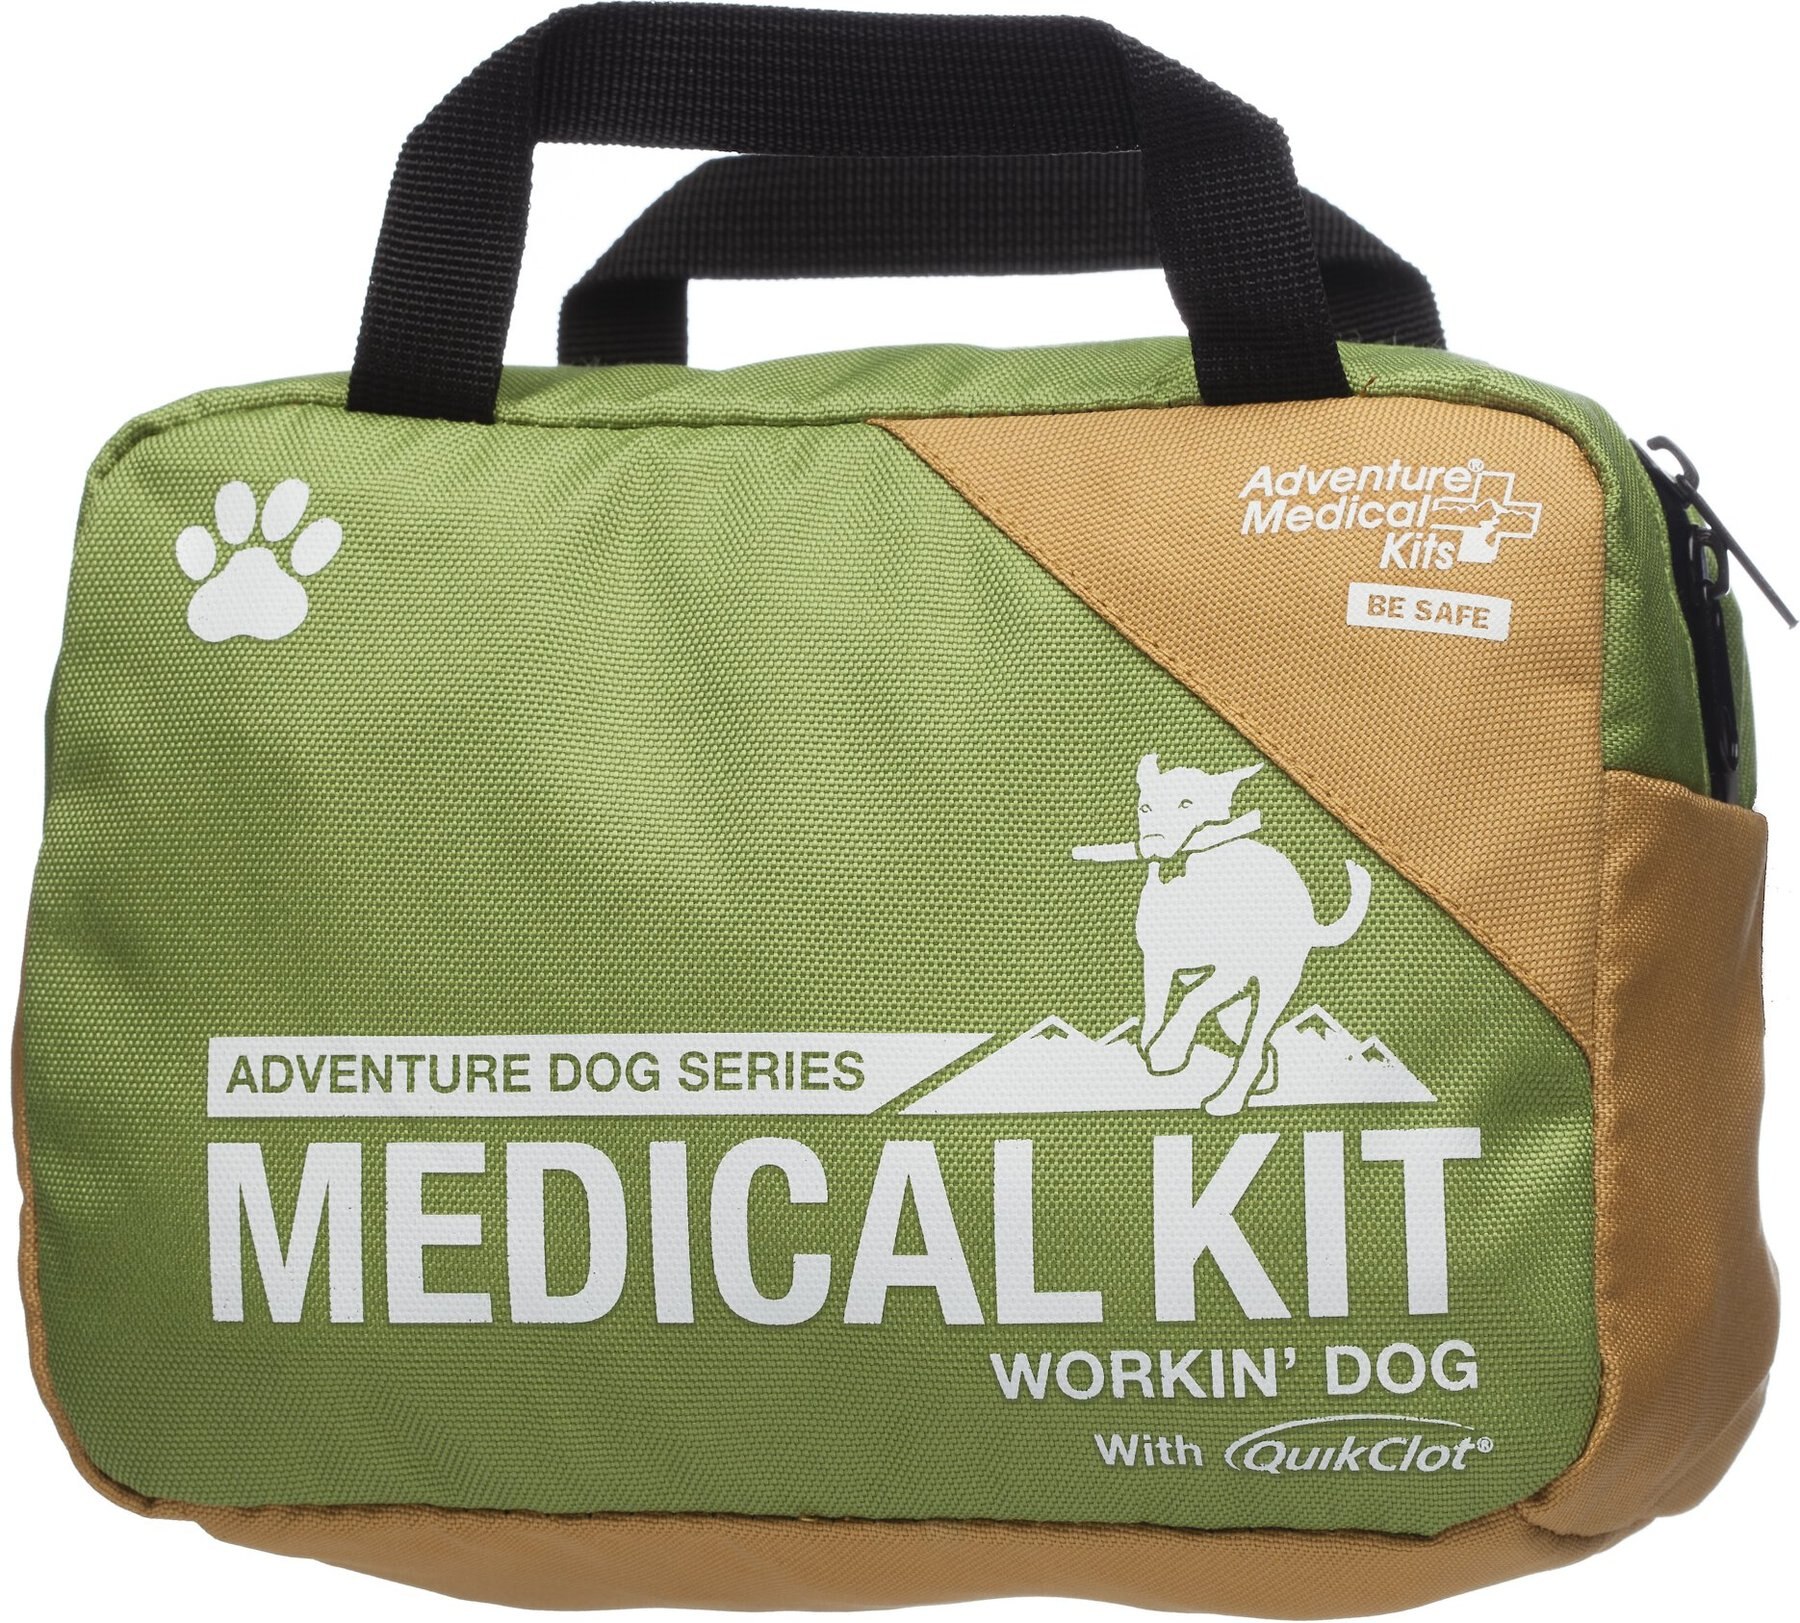 Adventure Medical Kits Workin Dog Canine First Aid Kit with QuikClot